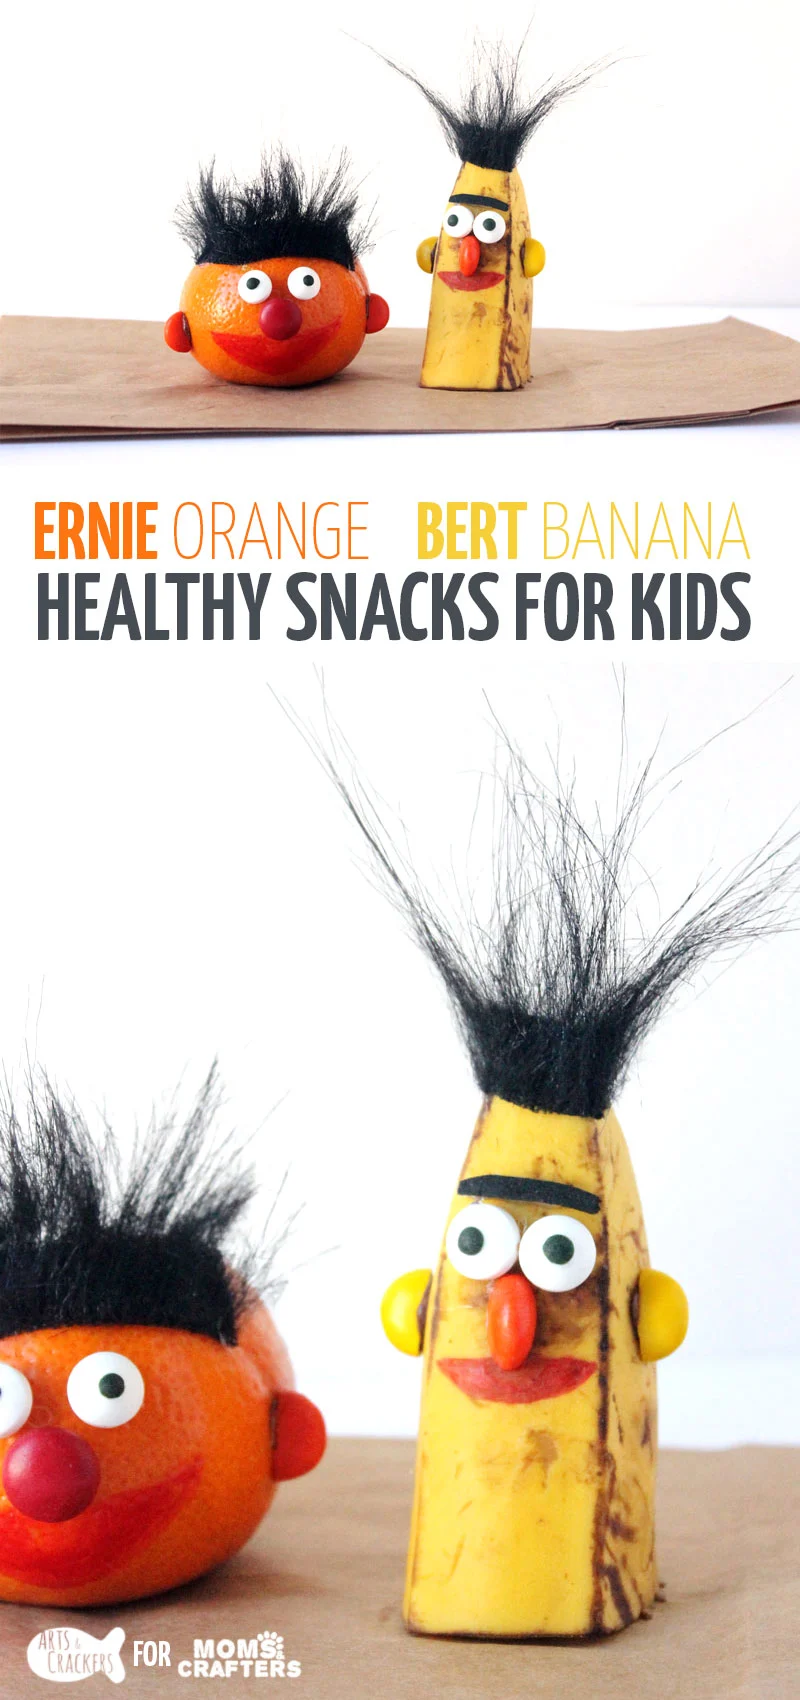 Make adorable Bert and Ernie snacks - perfect snack idea for picky kids who also happen to love Sesame Street! Great idea for a birthday party or for healthy school lunches.